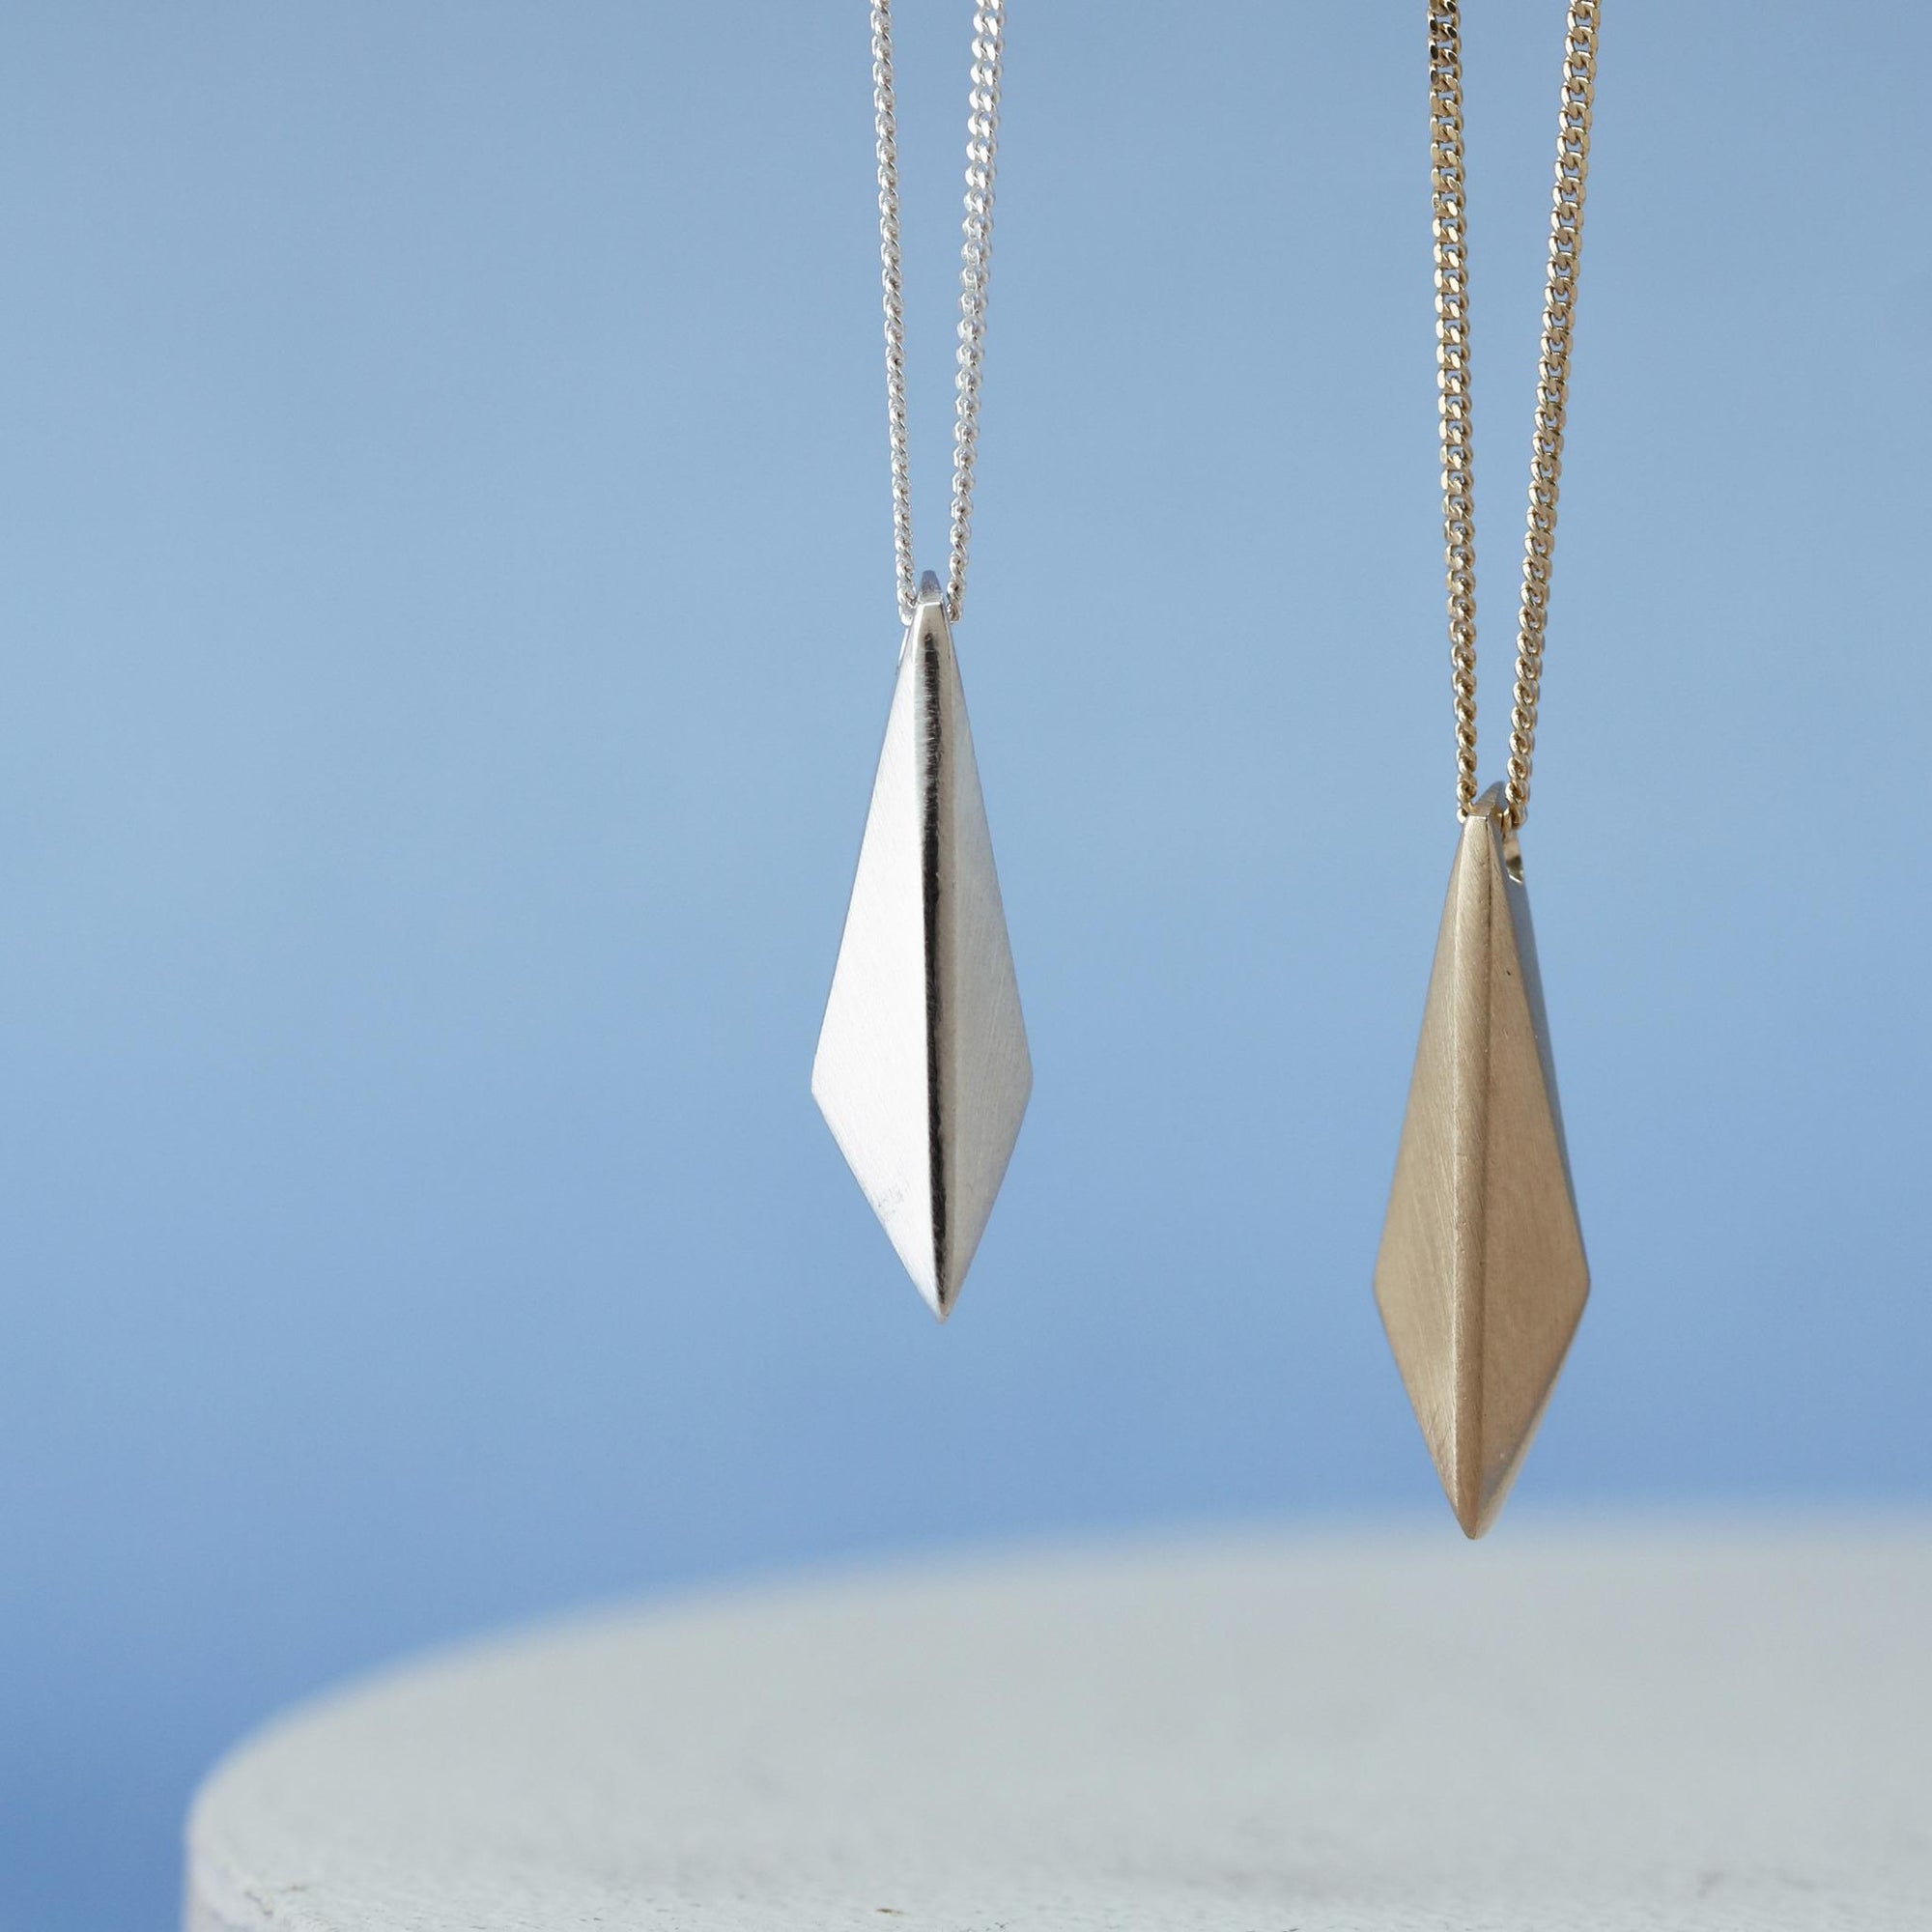 9ct Gold Kite Pendant. Solid Gold Pendant Necklace